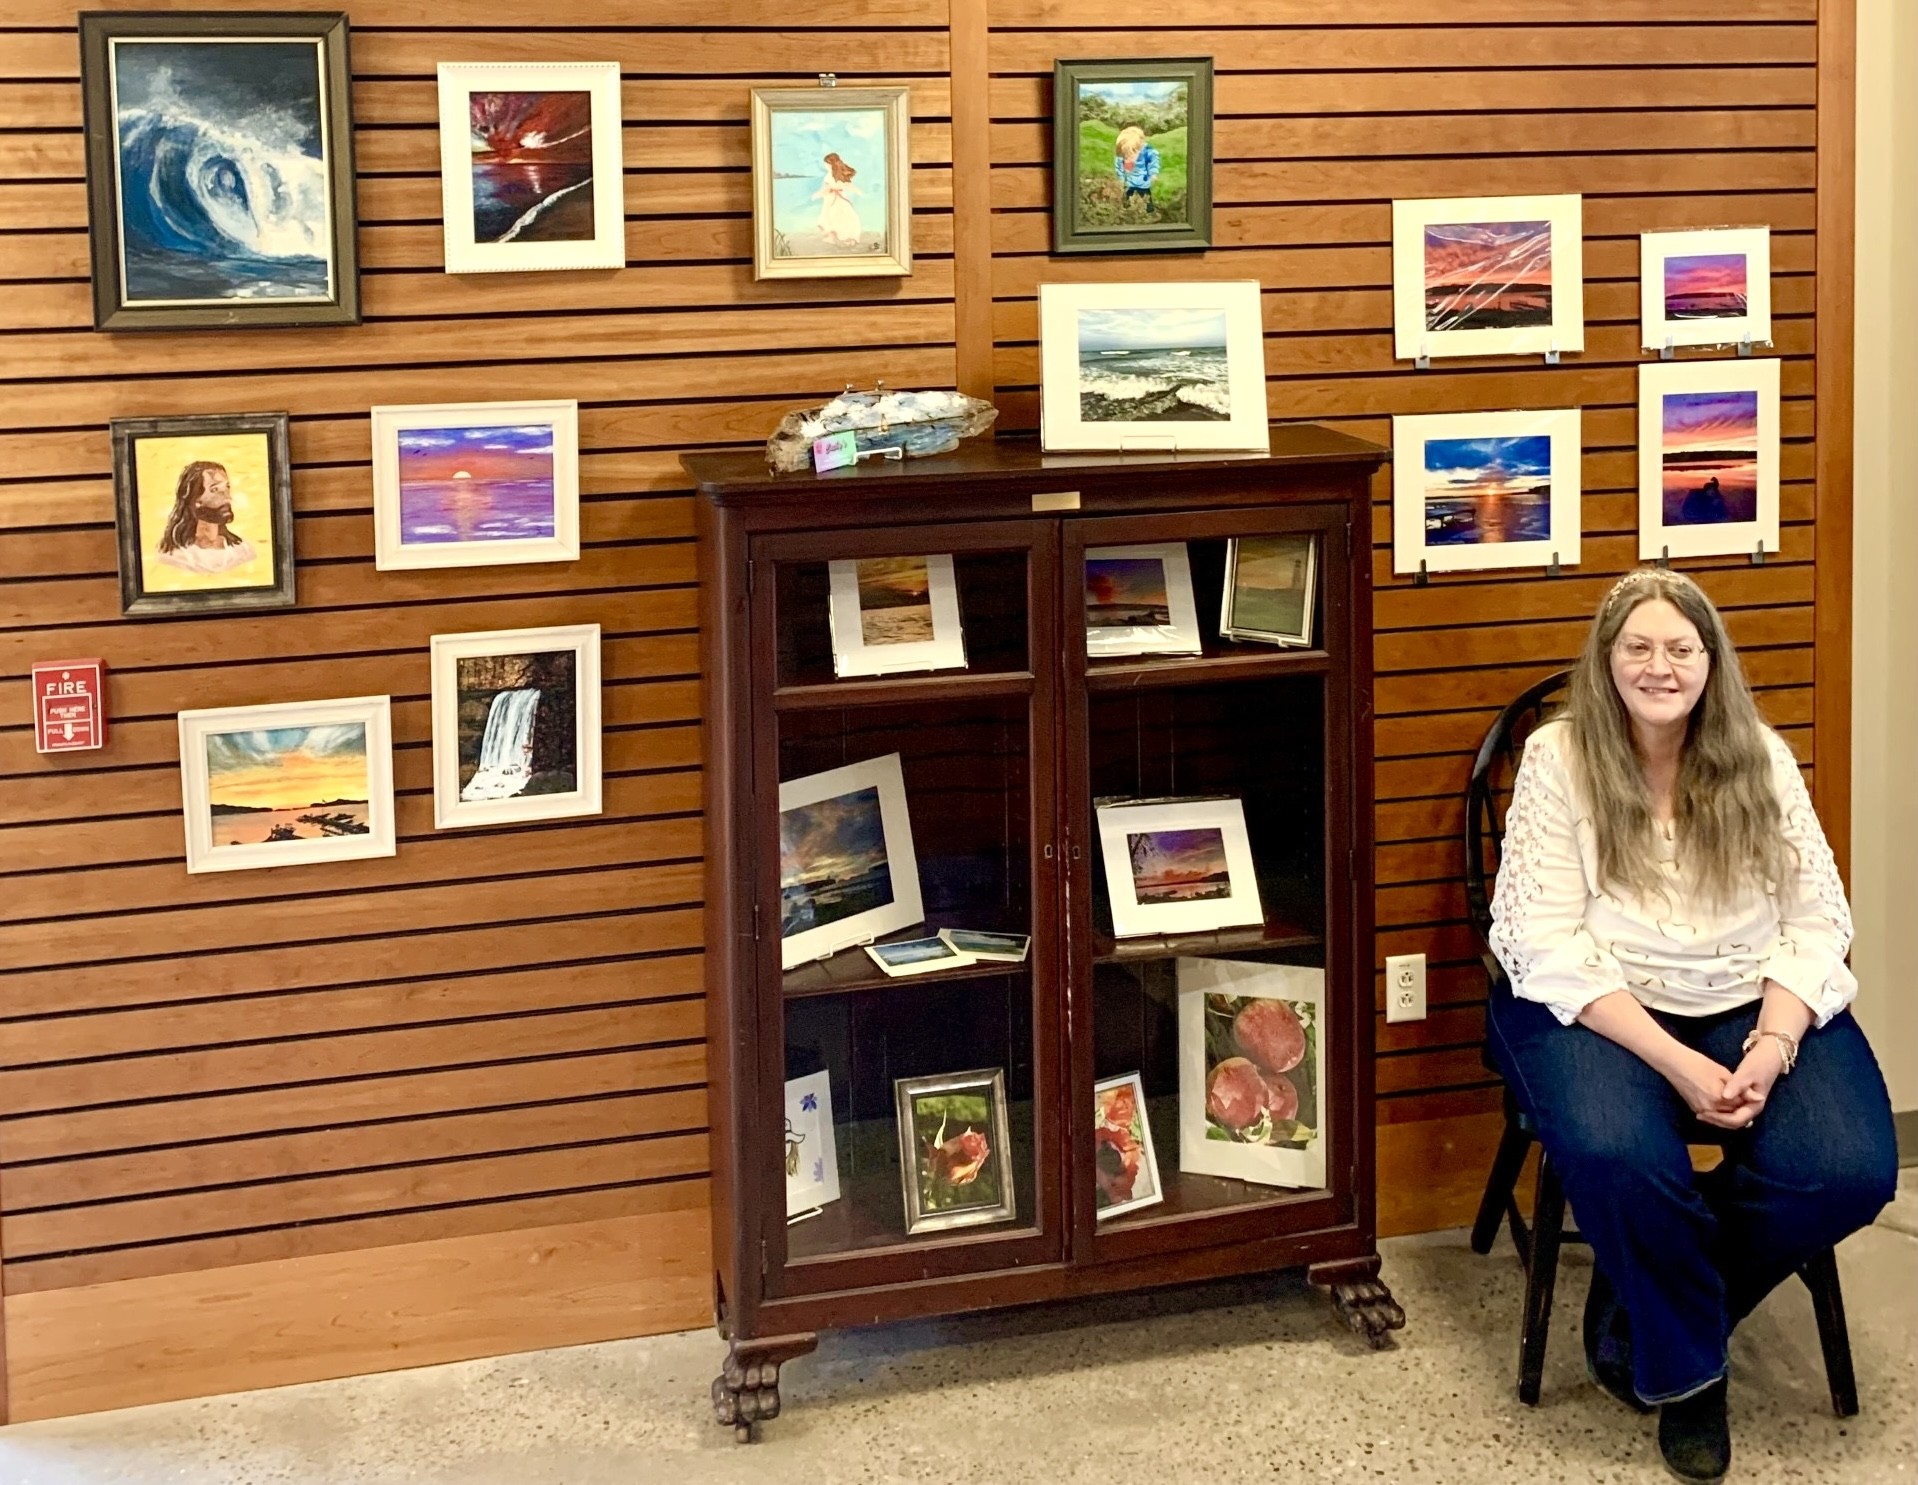 Artist Cathy Stewart sitting on a chair in front of the display of her art work on the wall at Mendon Public Library.